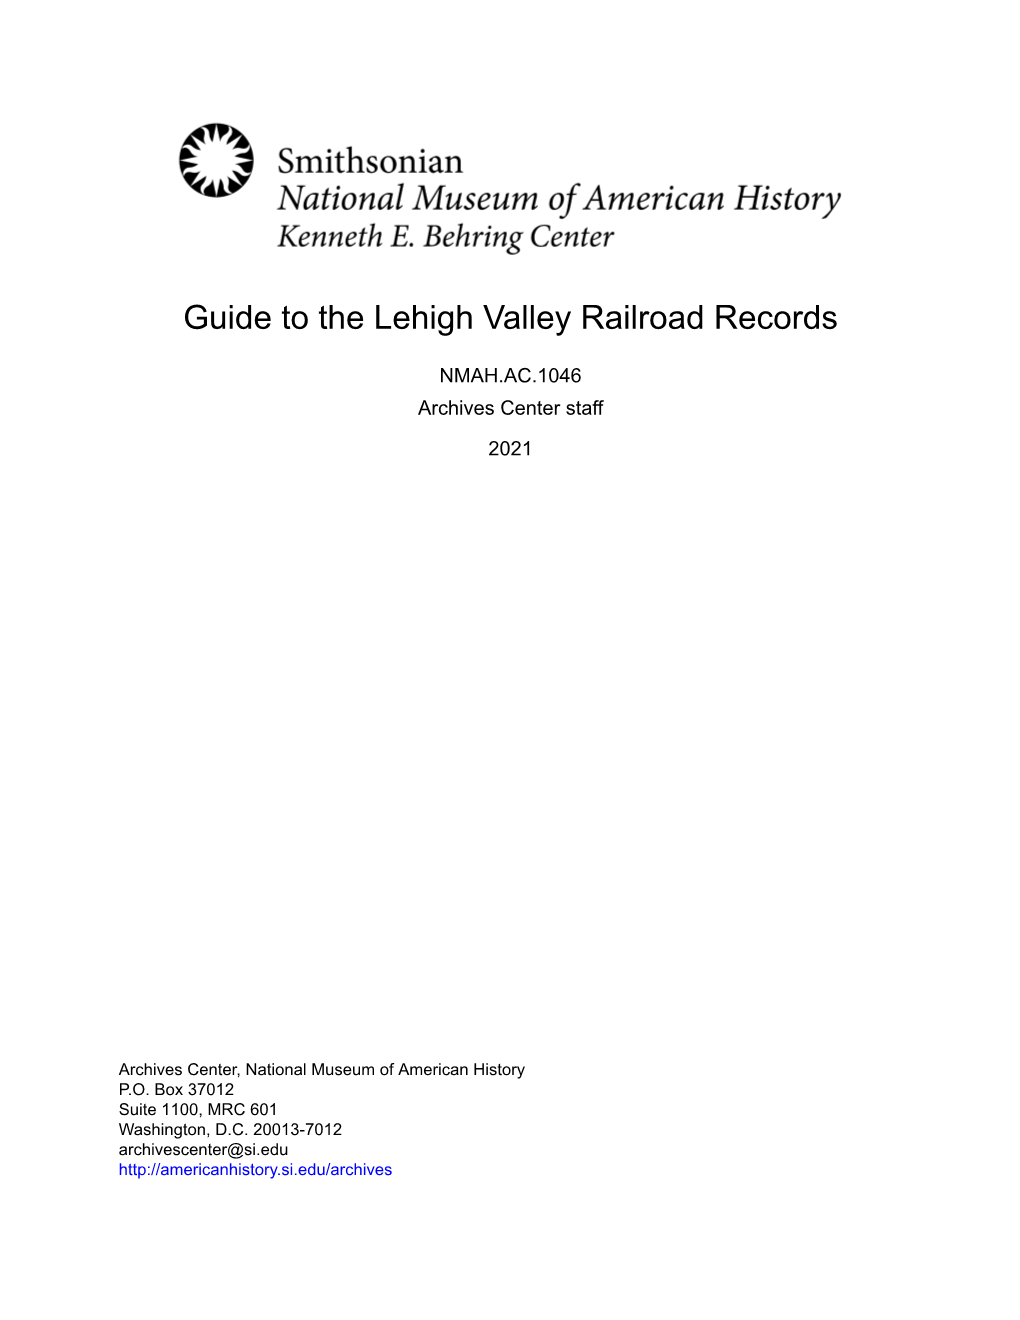 Guide to the Lehigh Valley Railroad Records